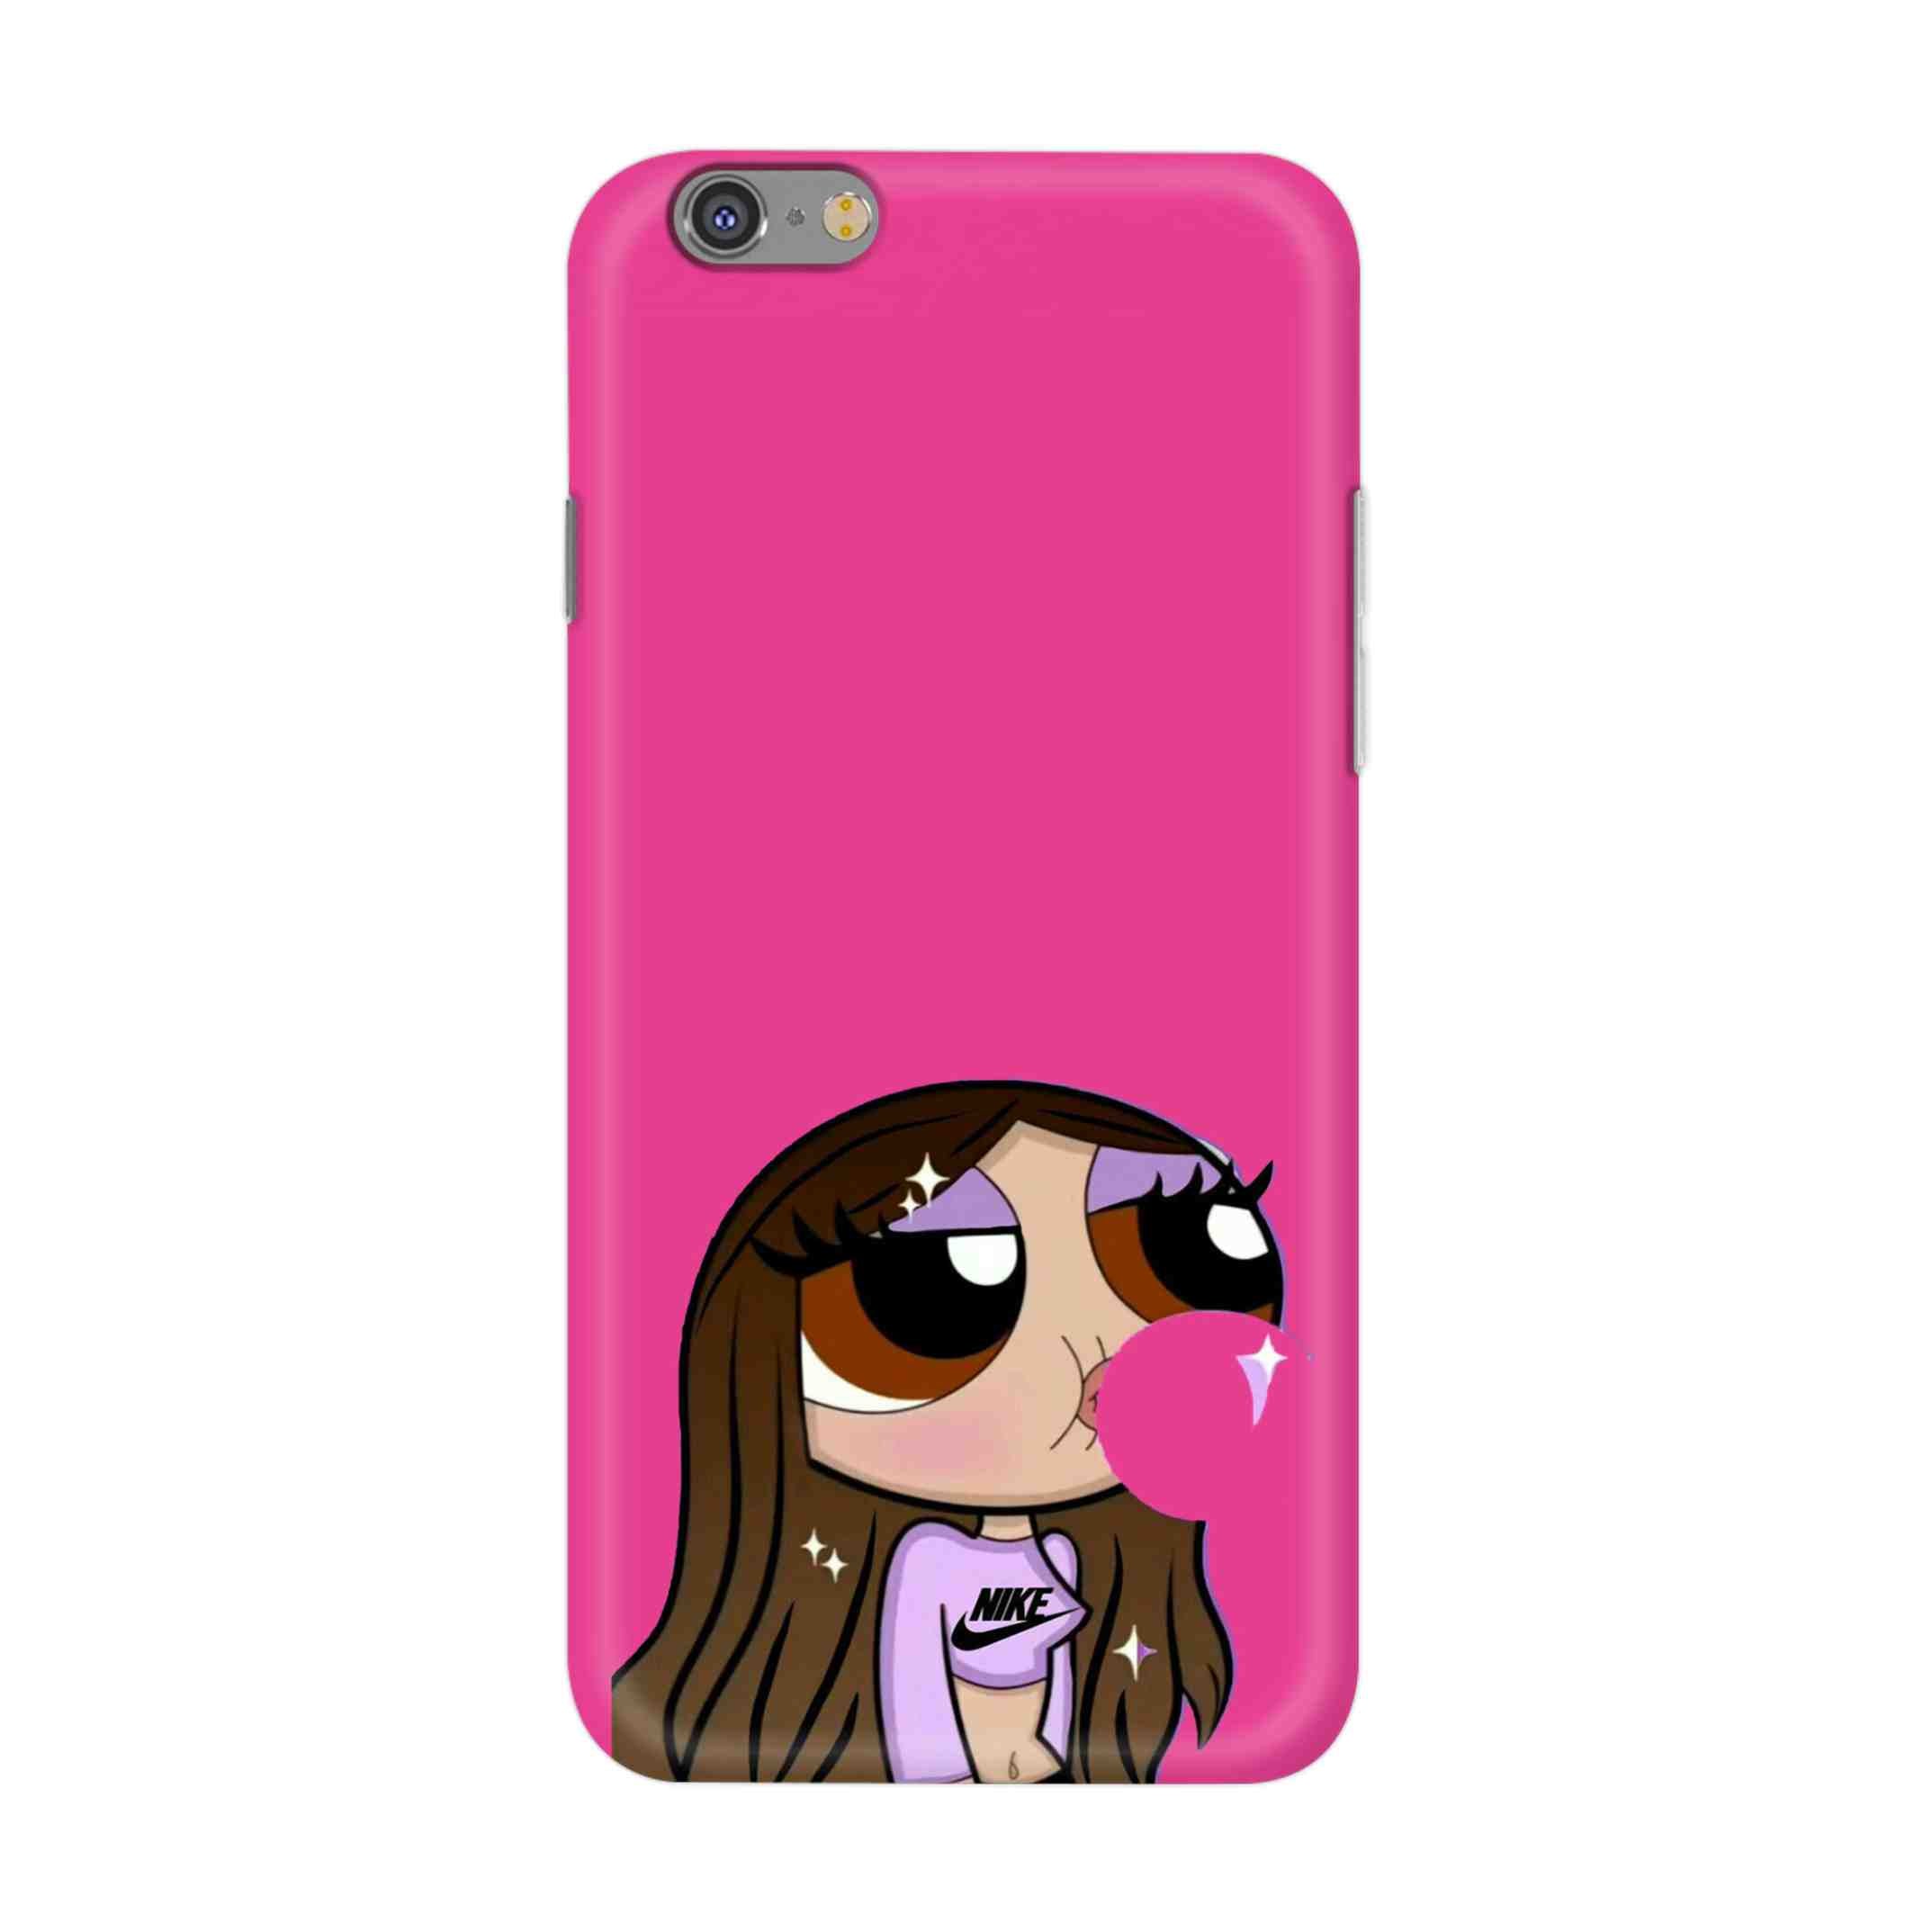 Buy Bubble Girl Hard Back Mobile Phone Case/Cover For iPhone 6 / 6s Online